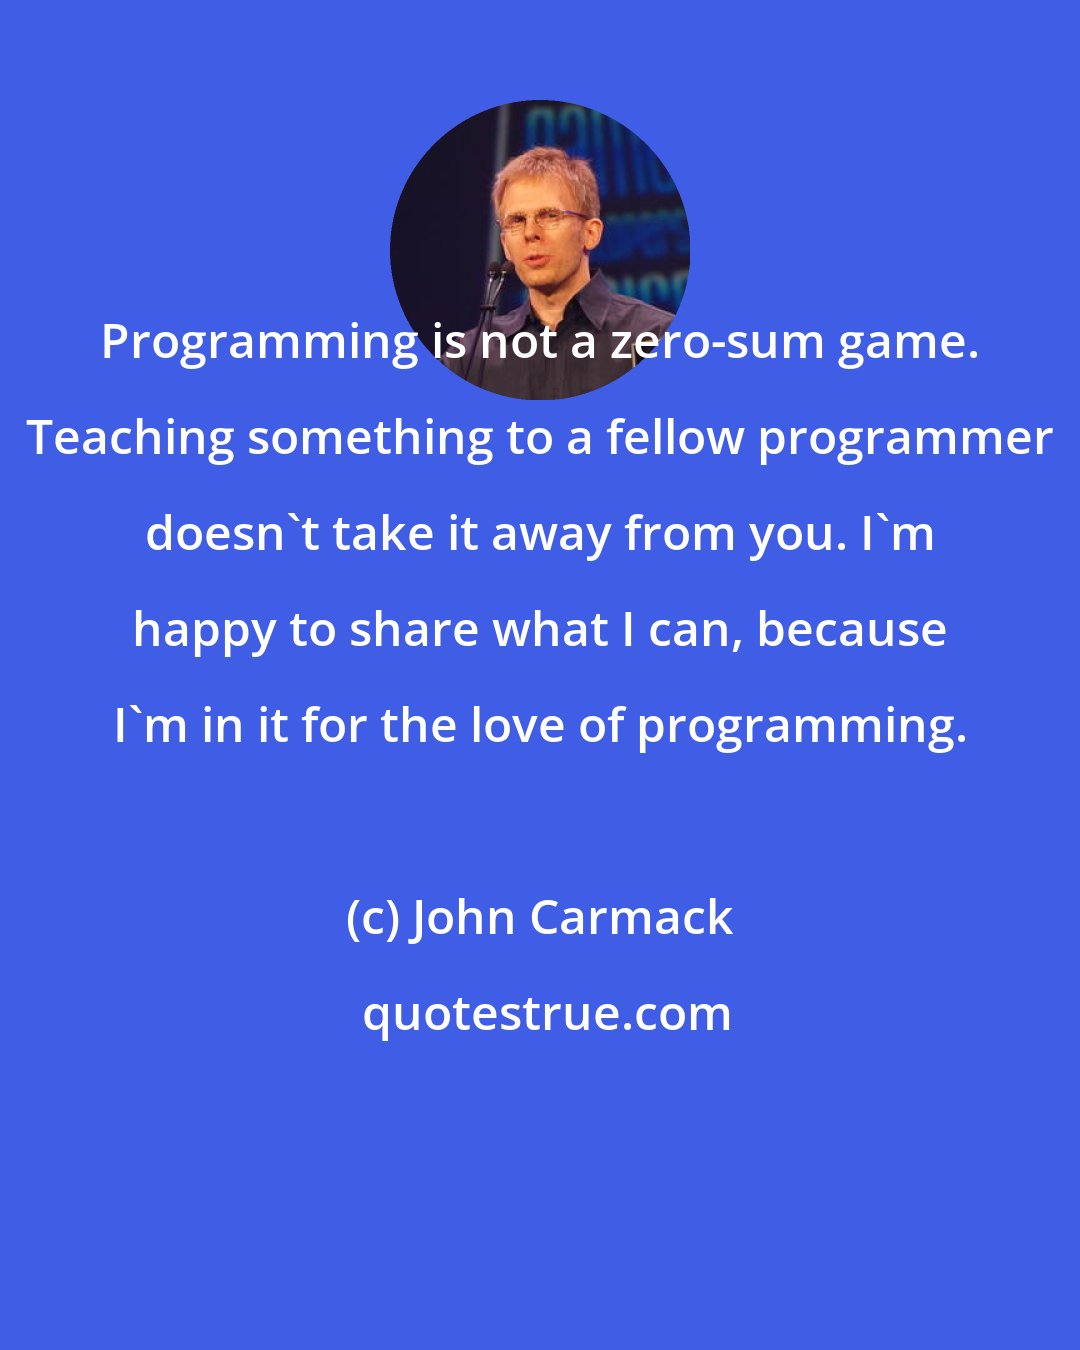 John Carmack: Programming is not a zero-sum game. Teaching something to a fellow programmer doesn't take it away from you. I'm happy to share what I can, because I'm in it for the love of programming.